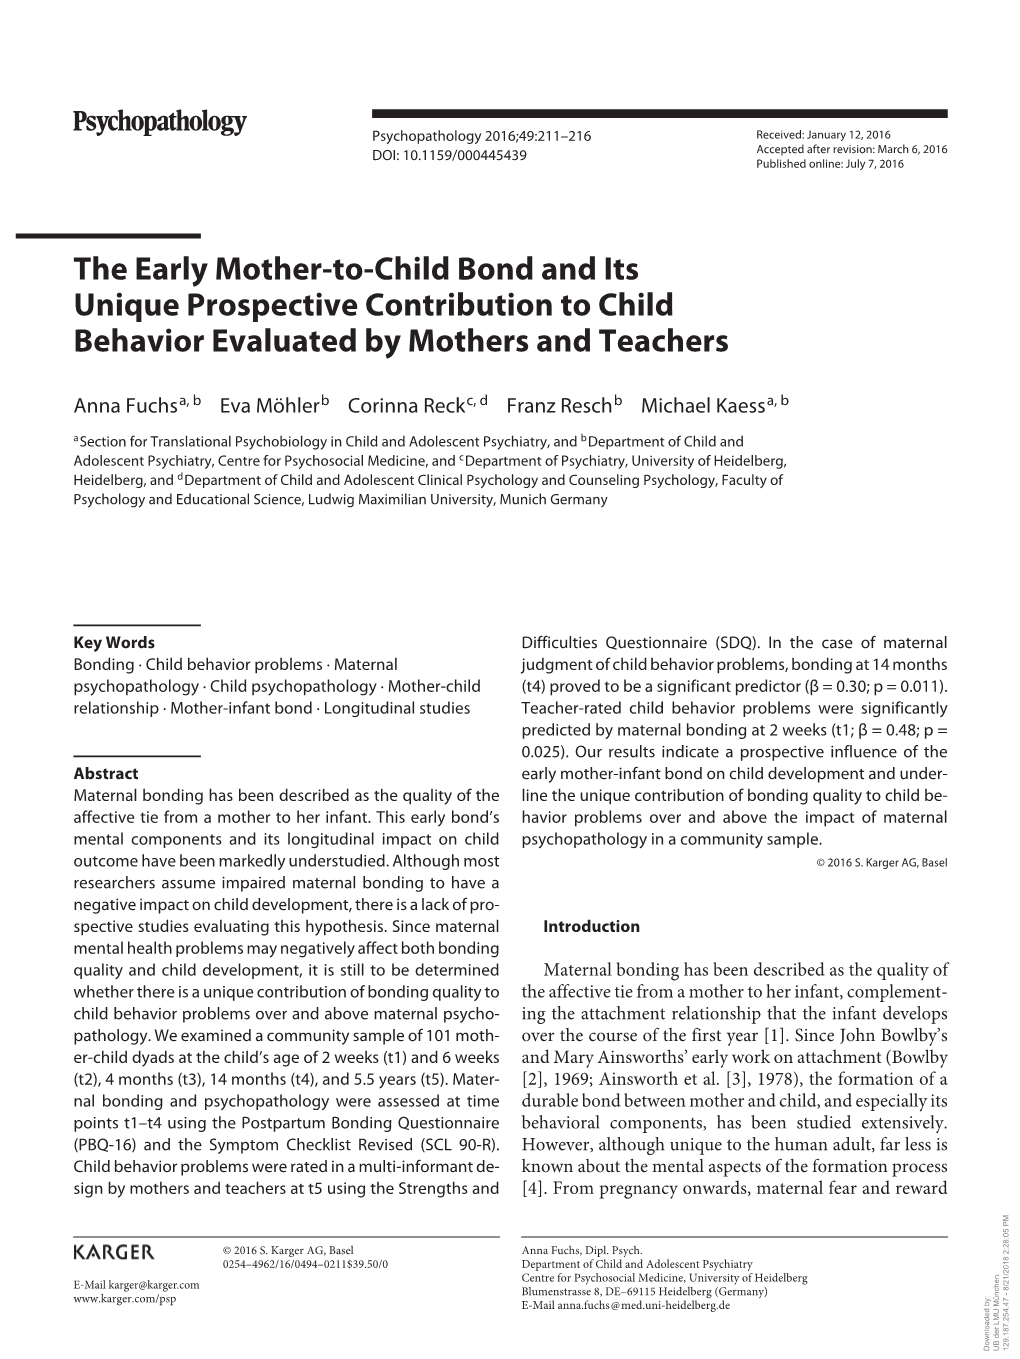 The Early Mother-To-Child Bond and Its Unique Prospective Contribution to Child Behavior Evaluated by Mothers and Teachers